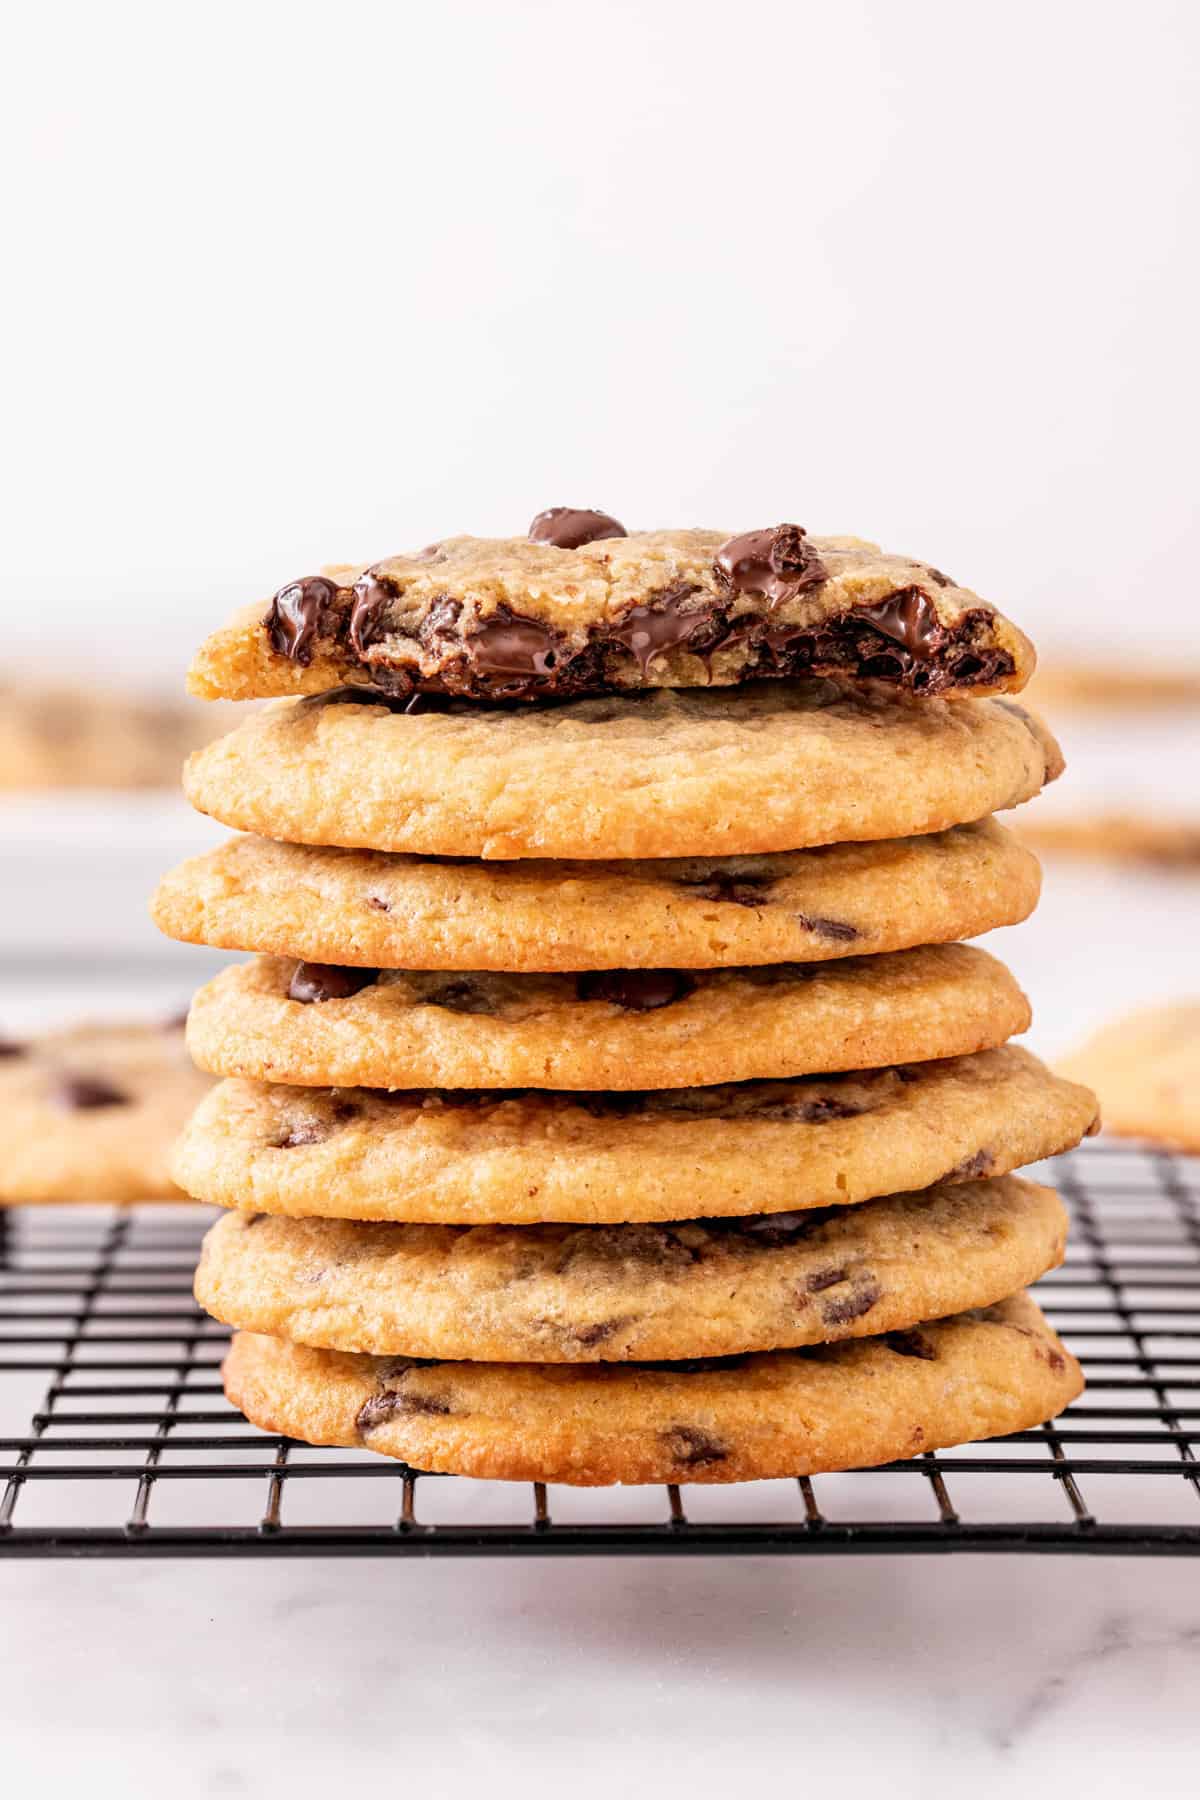 Close up of a stack of seven crispy and chewy chocolate chip cookies on a wire cooling rack.